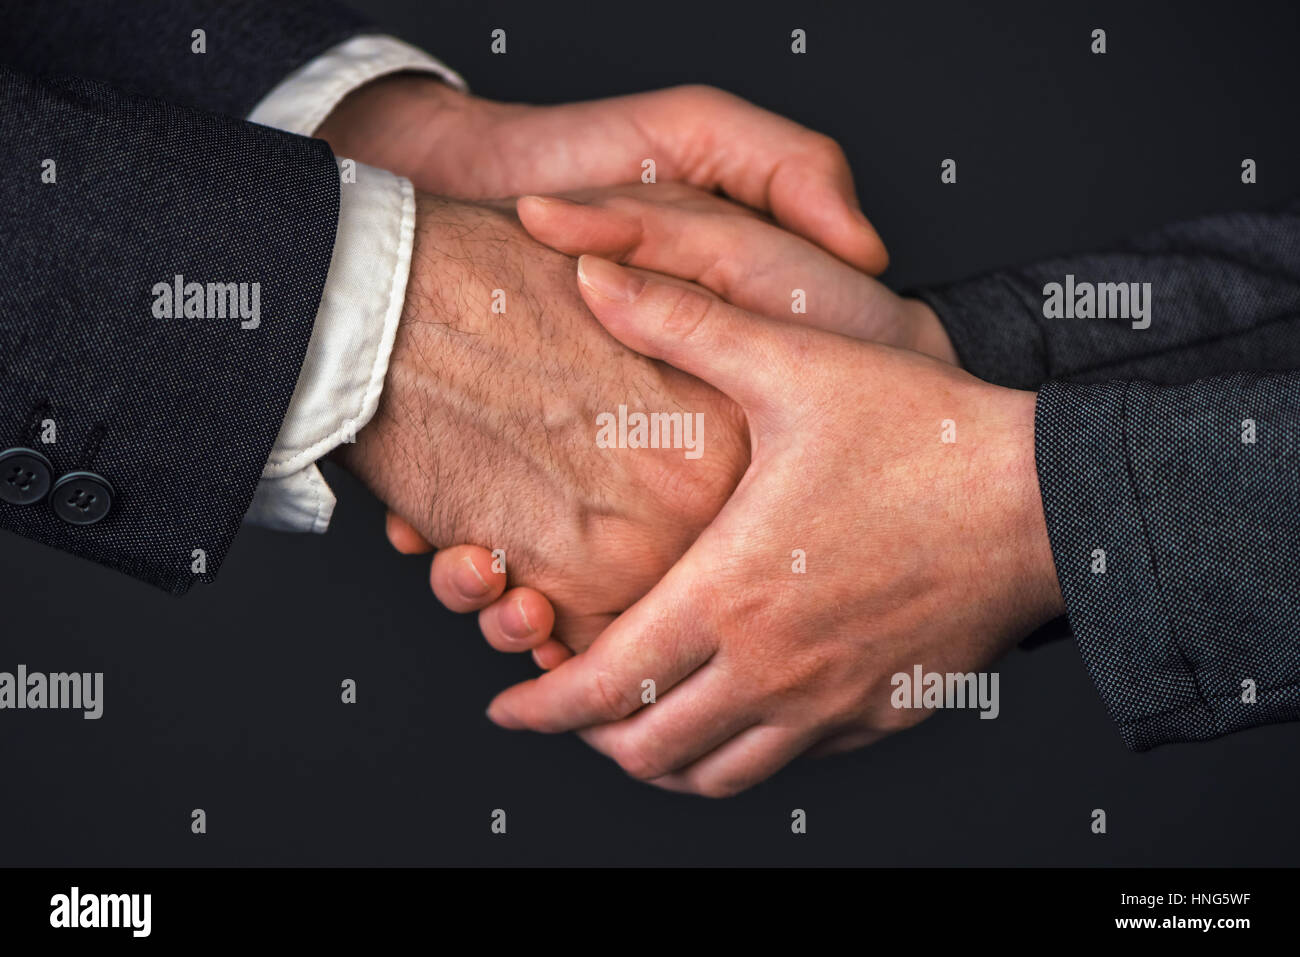 Businessman and businesswoman handshake in office, people greeting each other at business meeting, close up of hands Stock Photo